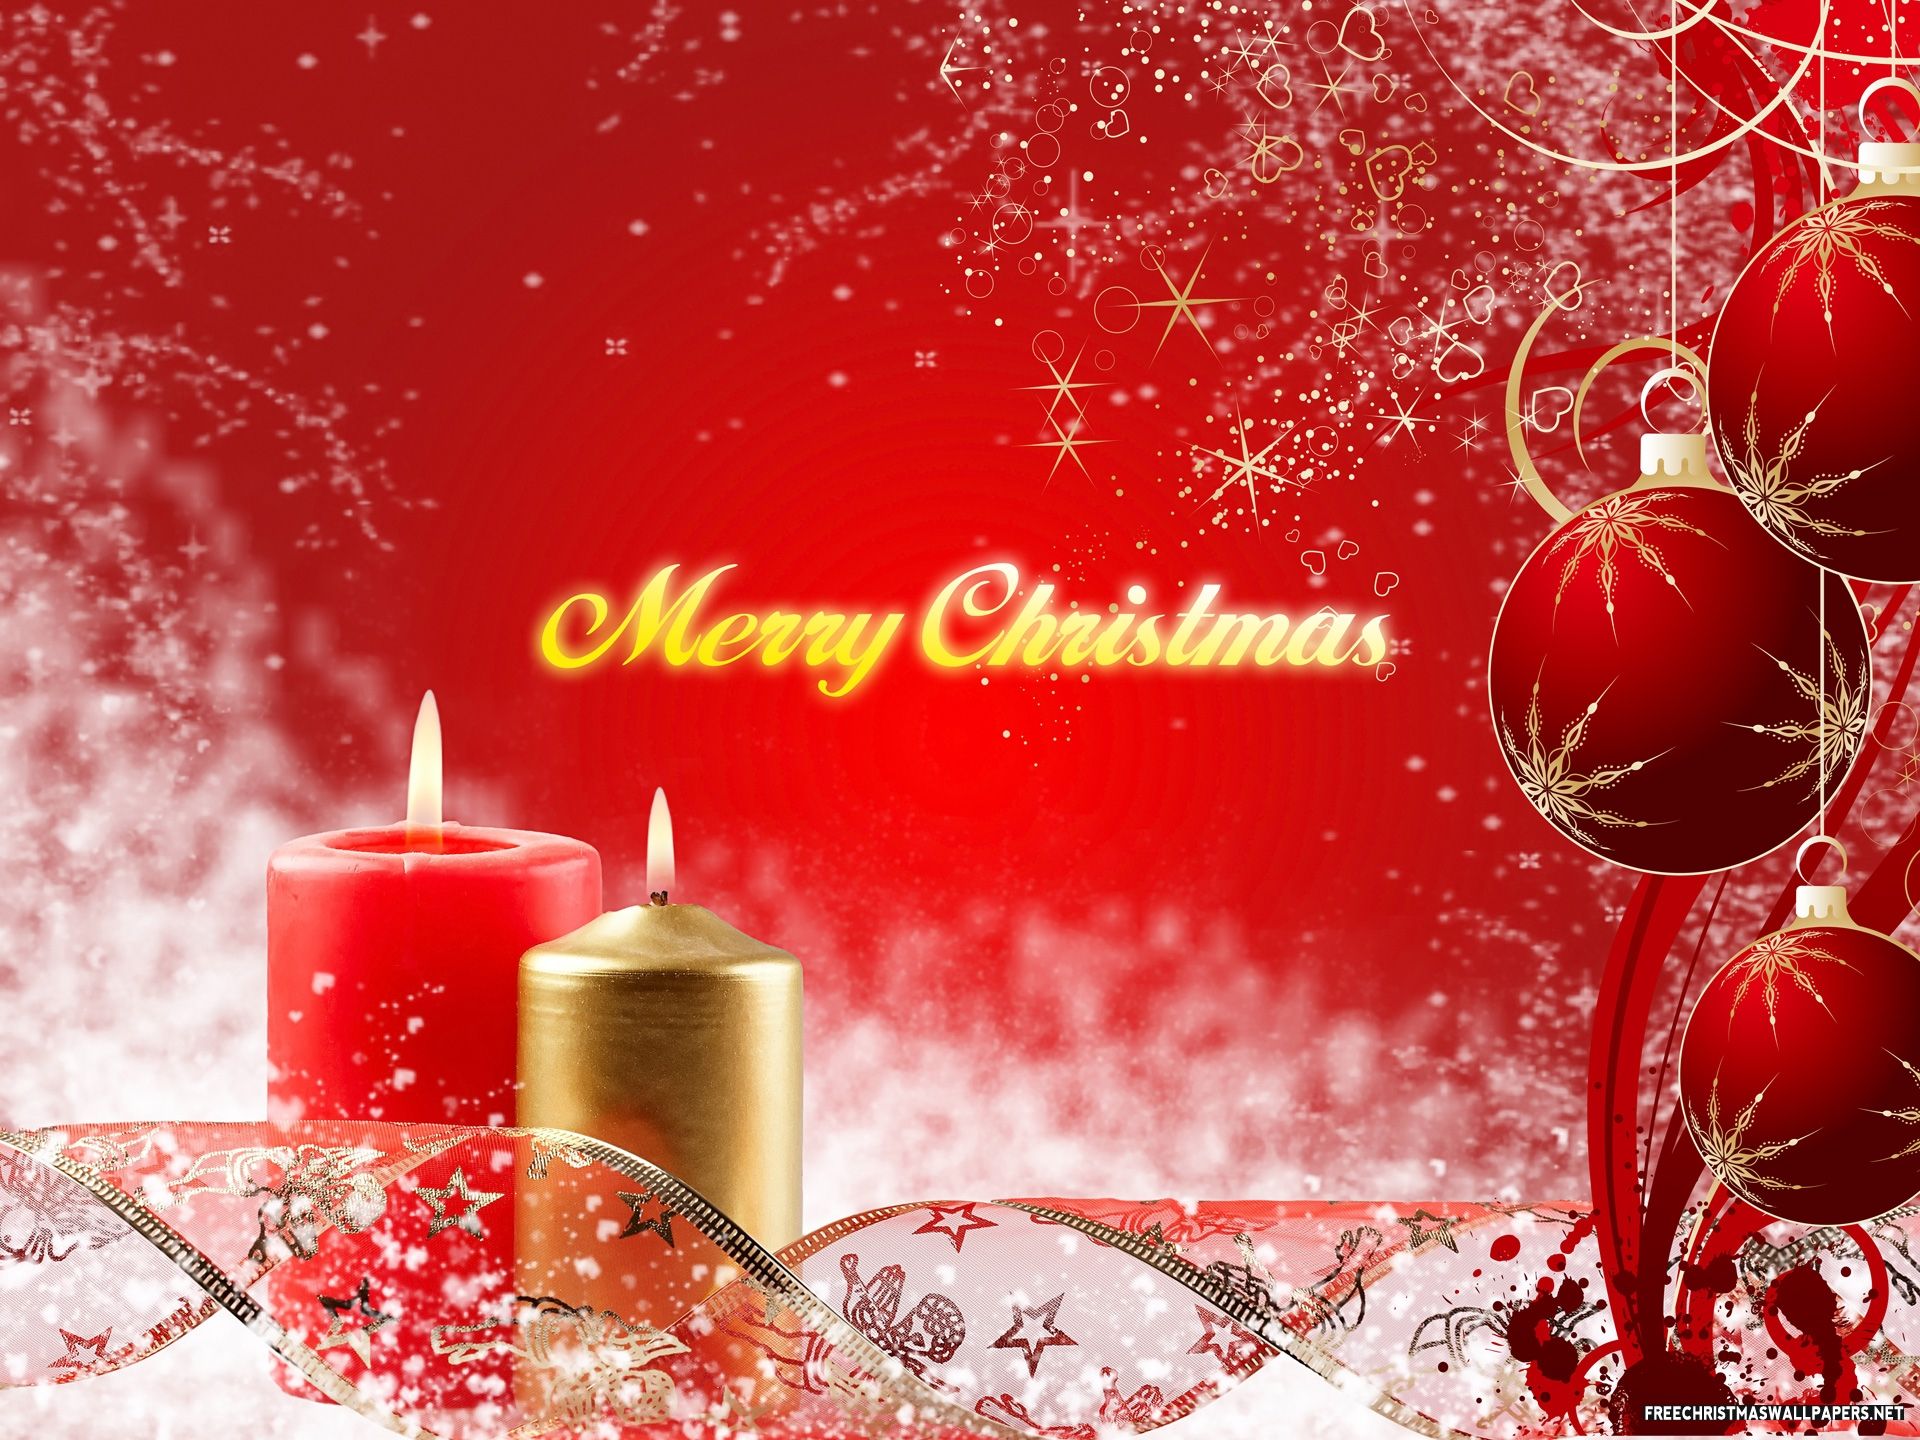 Advance Merry Christmas 2015 Images Pictures Whatsapp dp Fb Covers ...